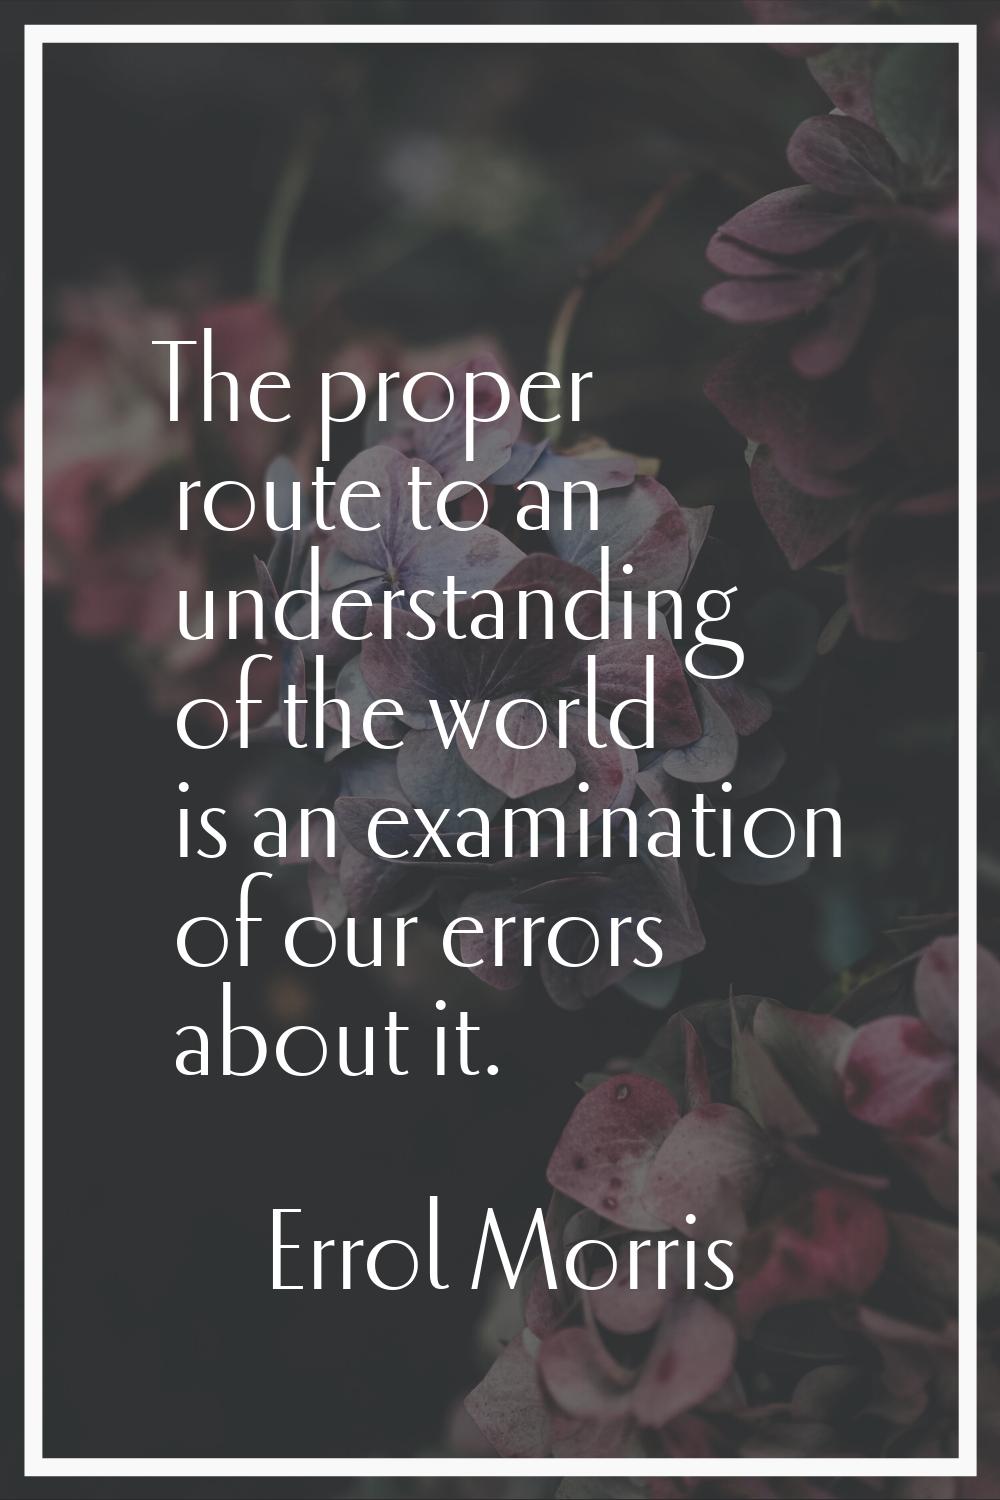 The proper route to an understanding of the world is an examination of our errors about it.